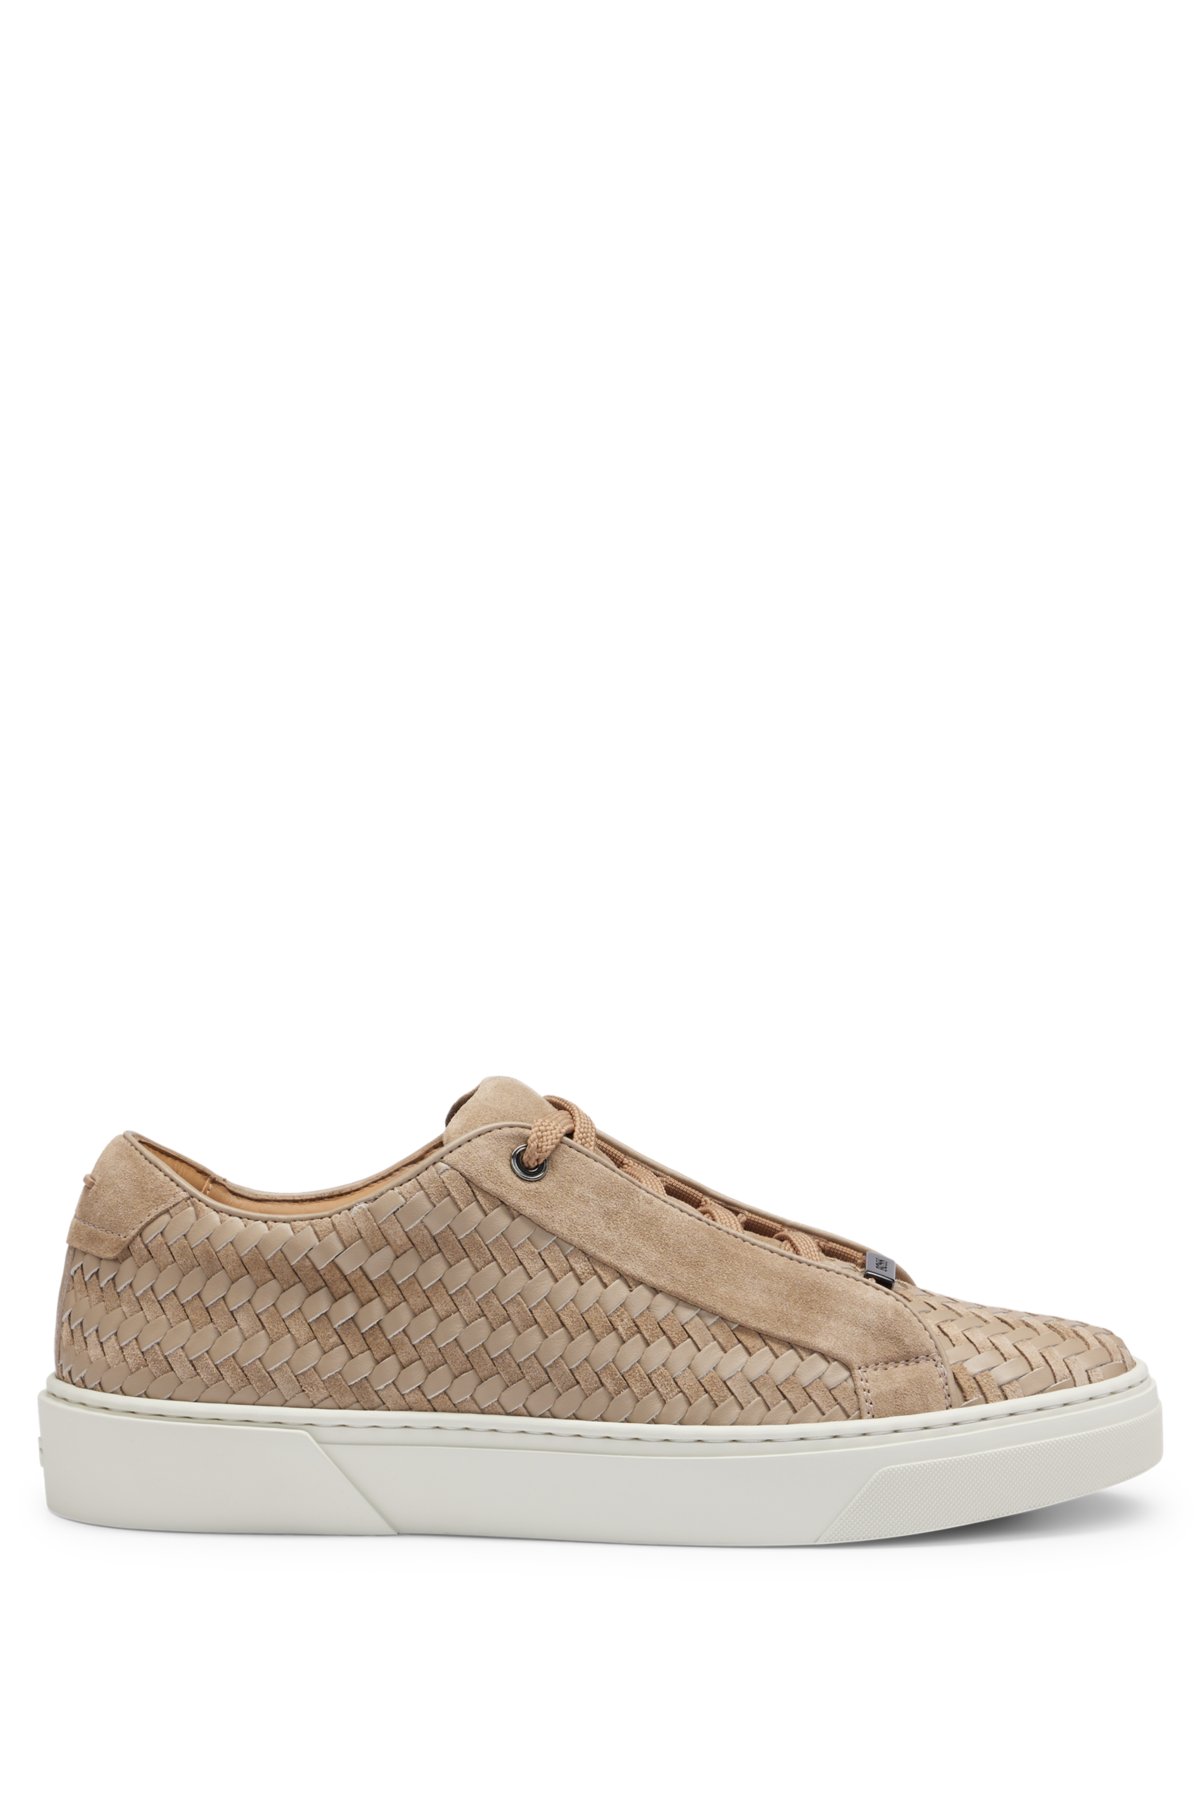 Gary Italian-made woven trainers in leather and suede, Beige